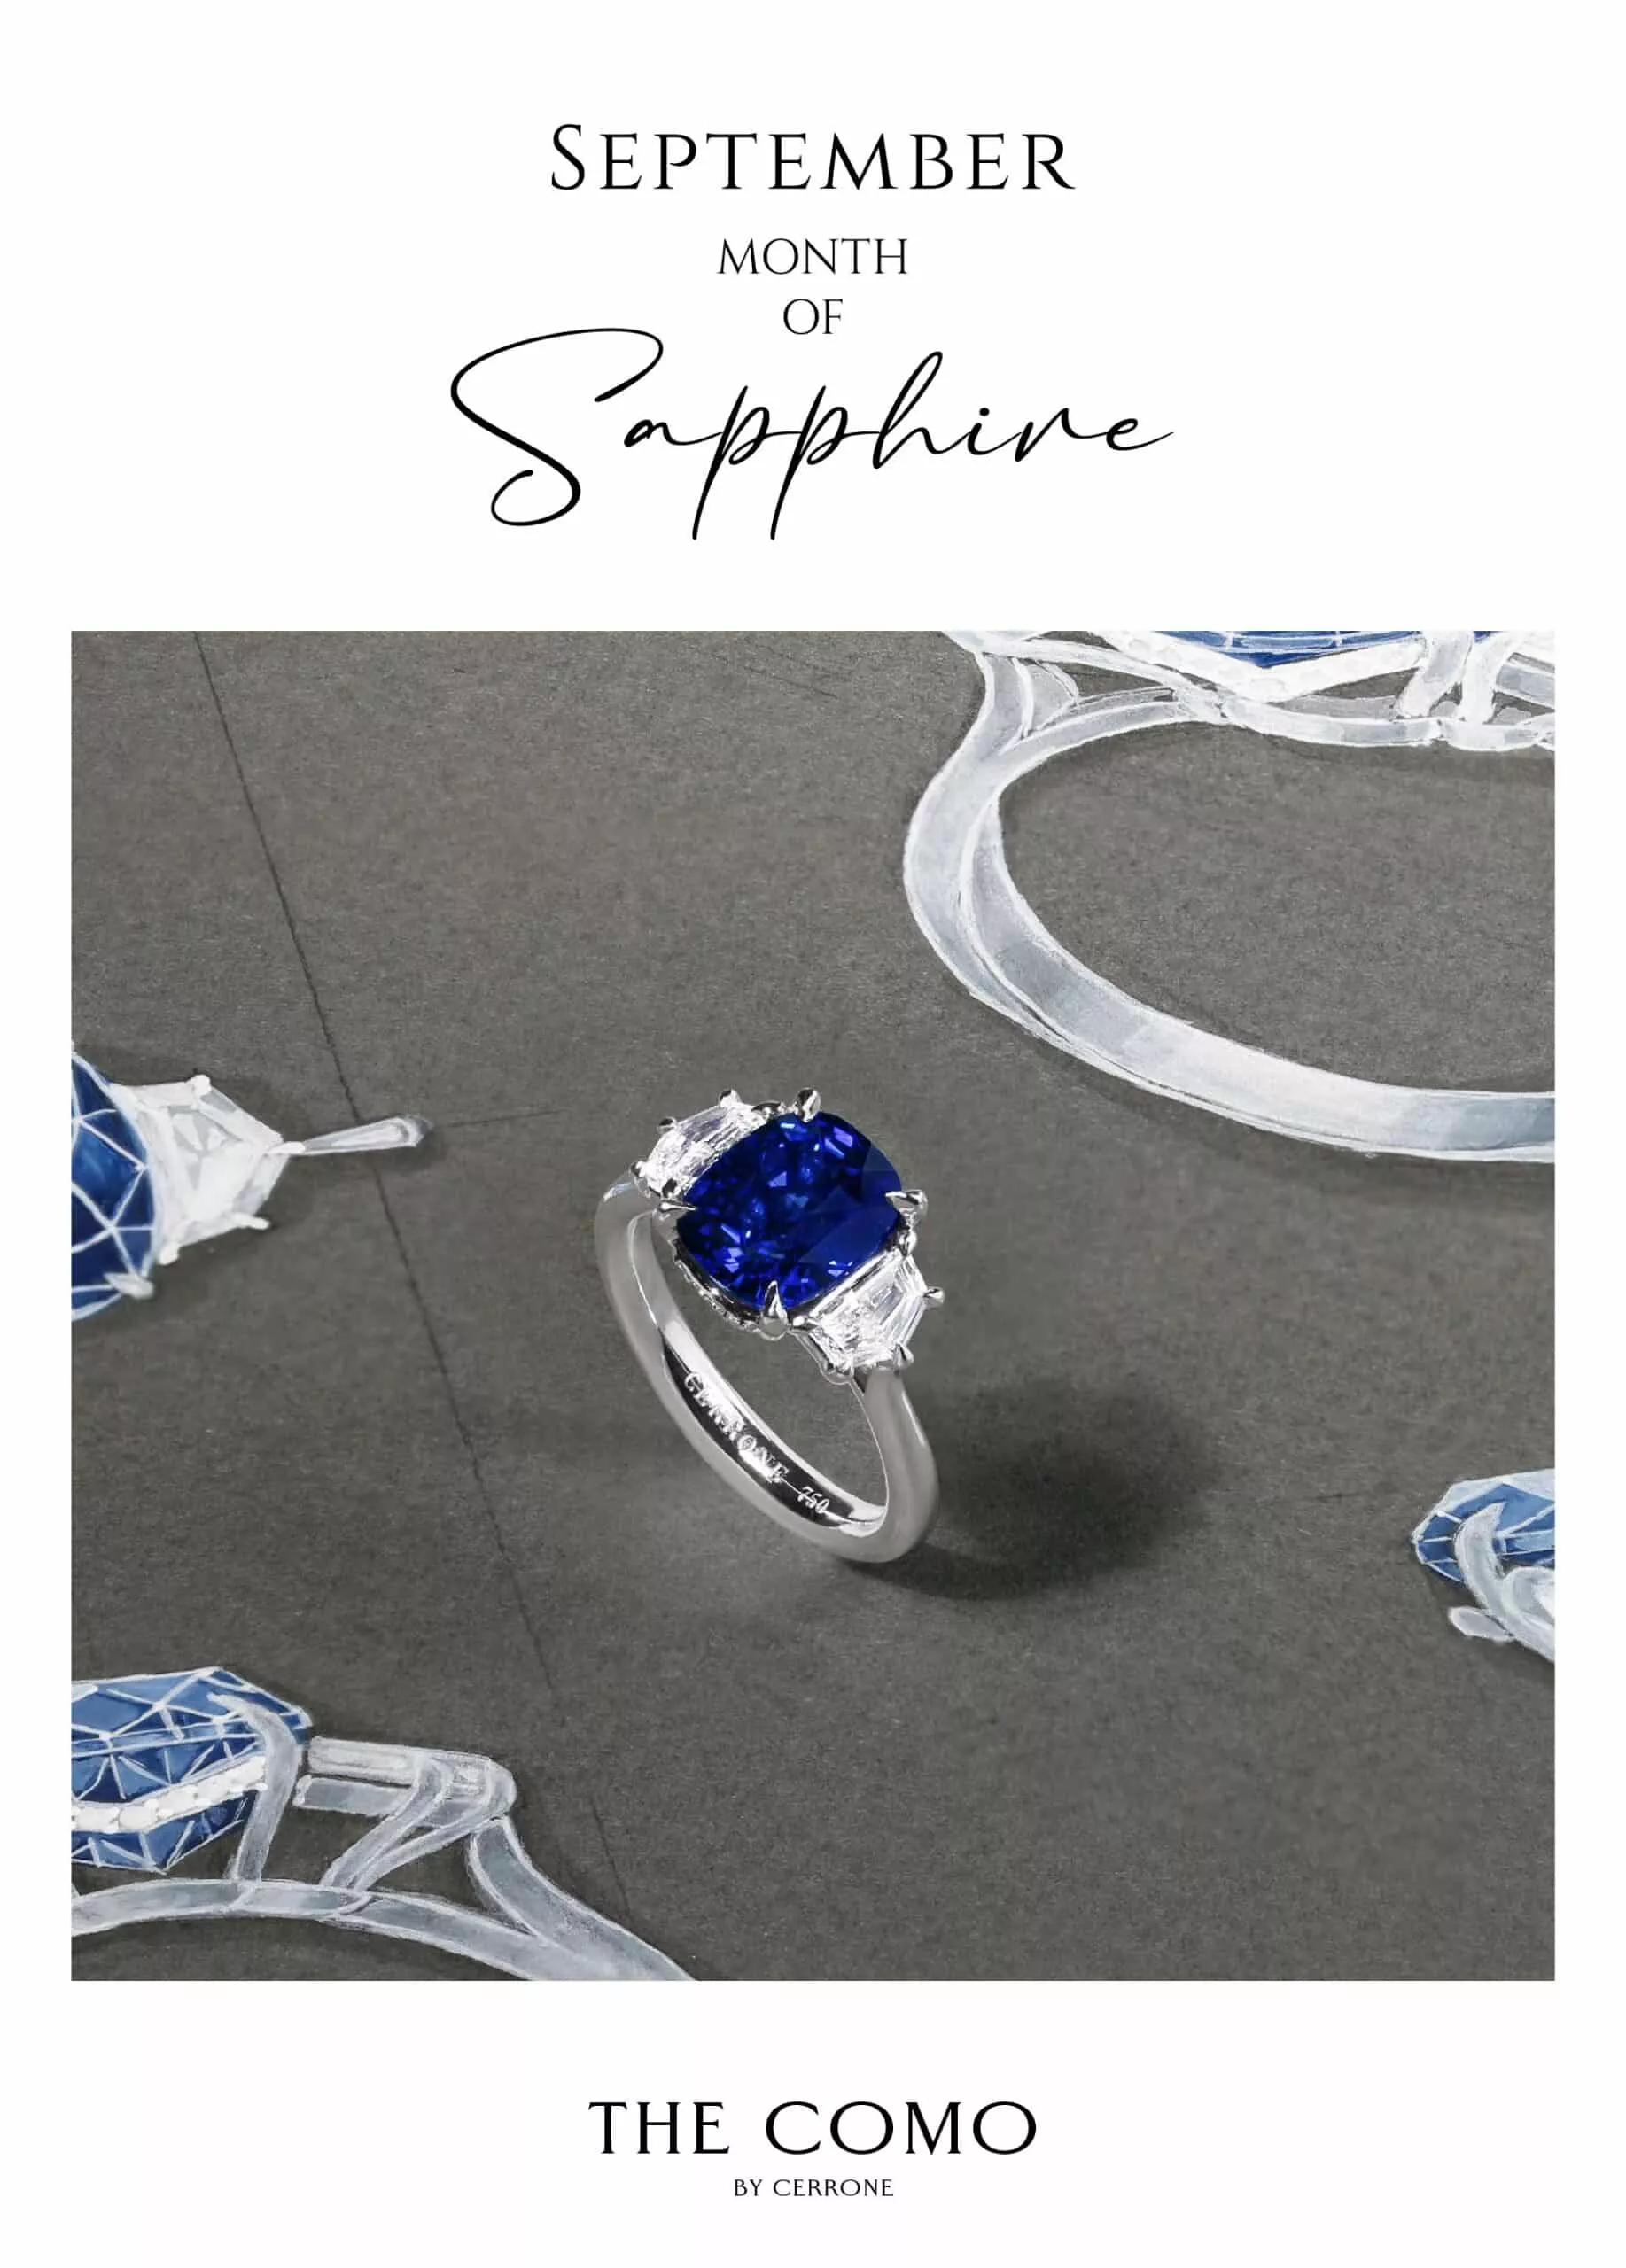 SEPTEMBER - MONTH OF SAPPHIRE